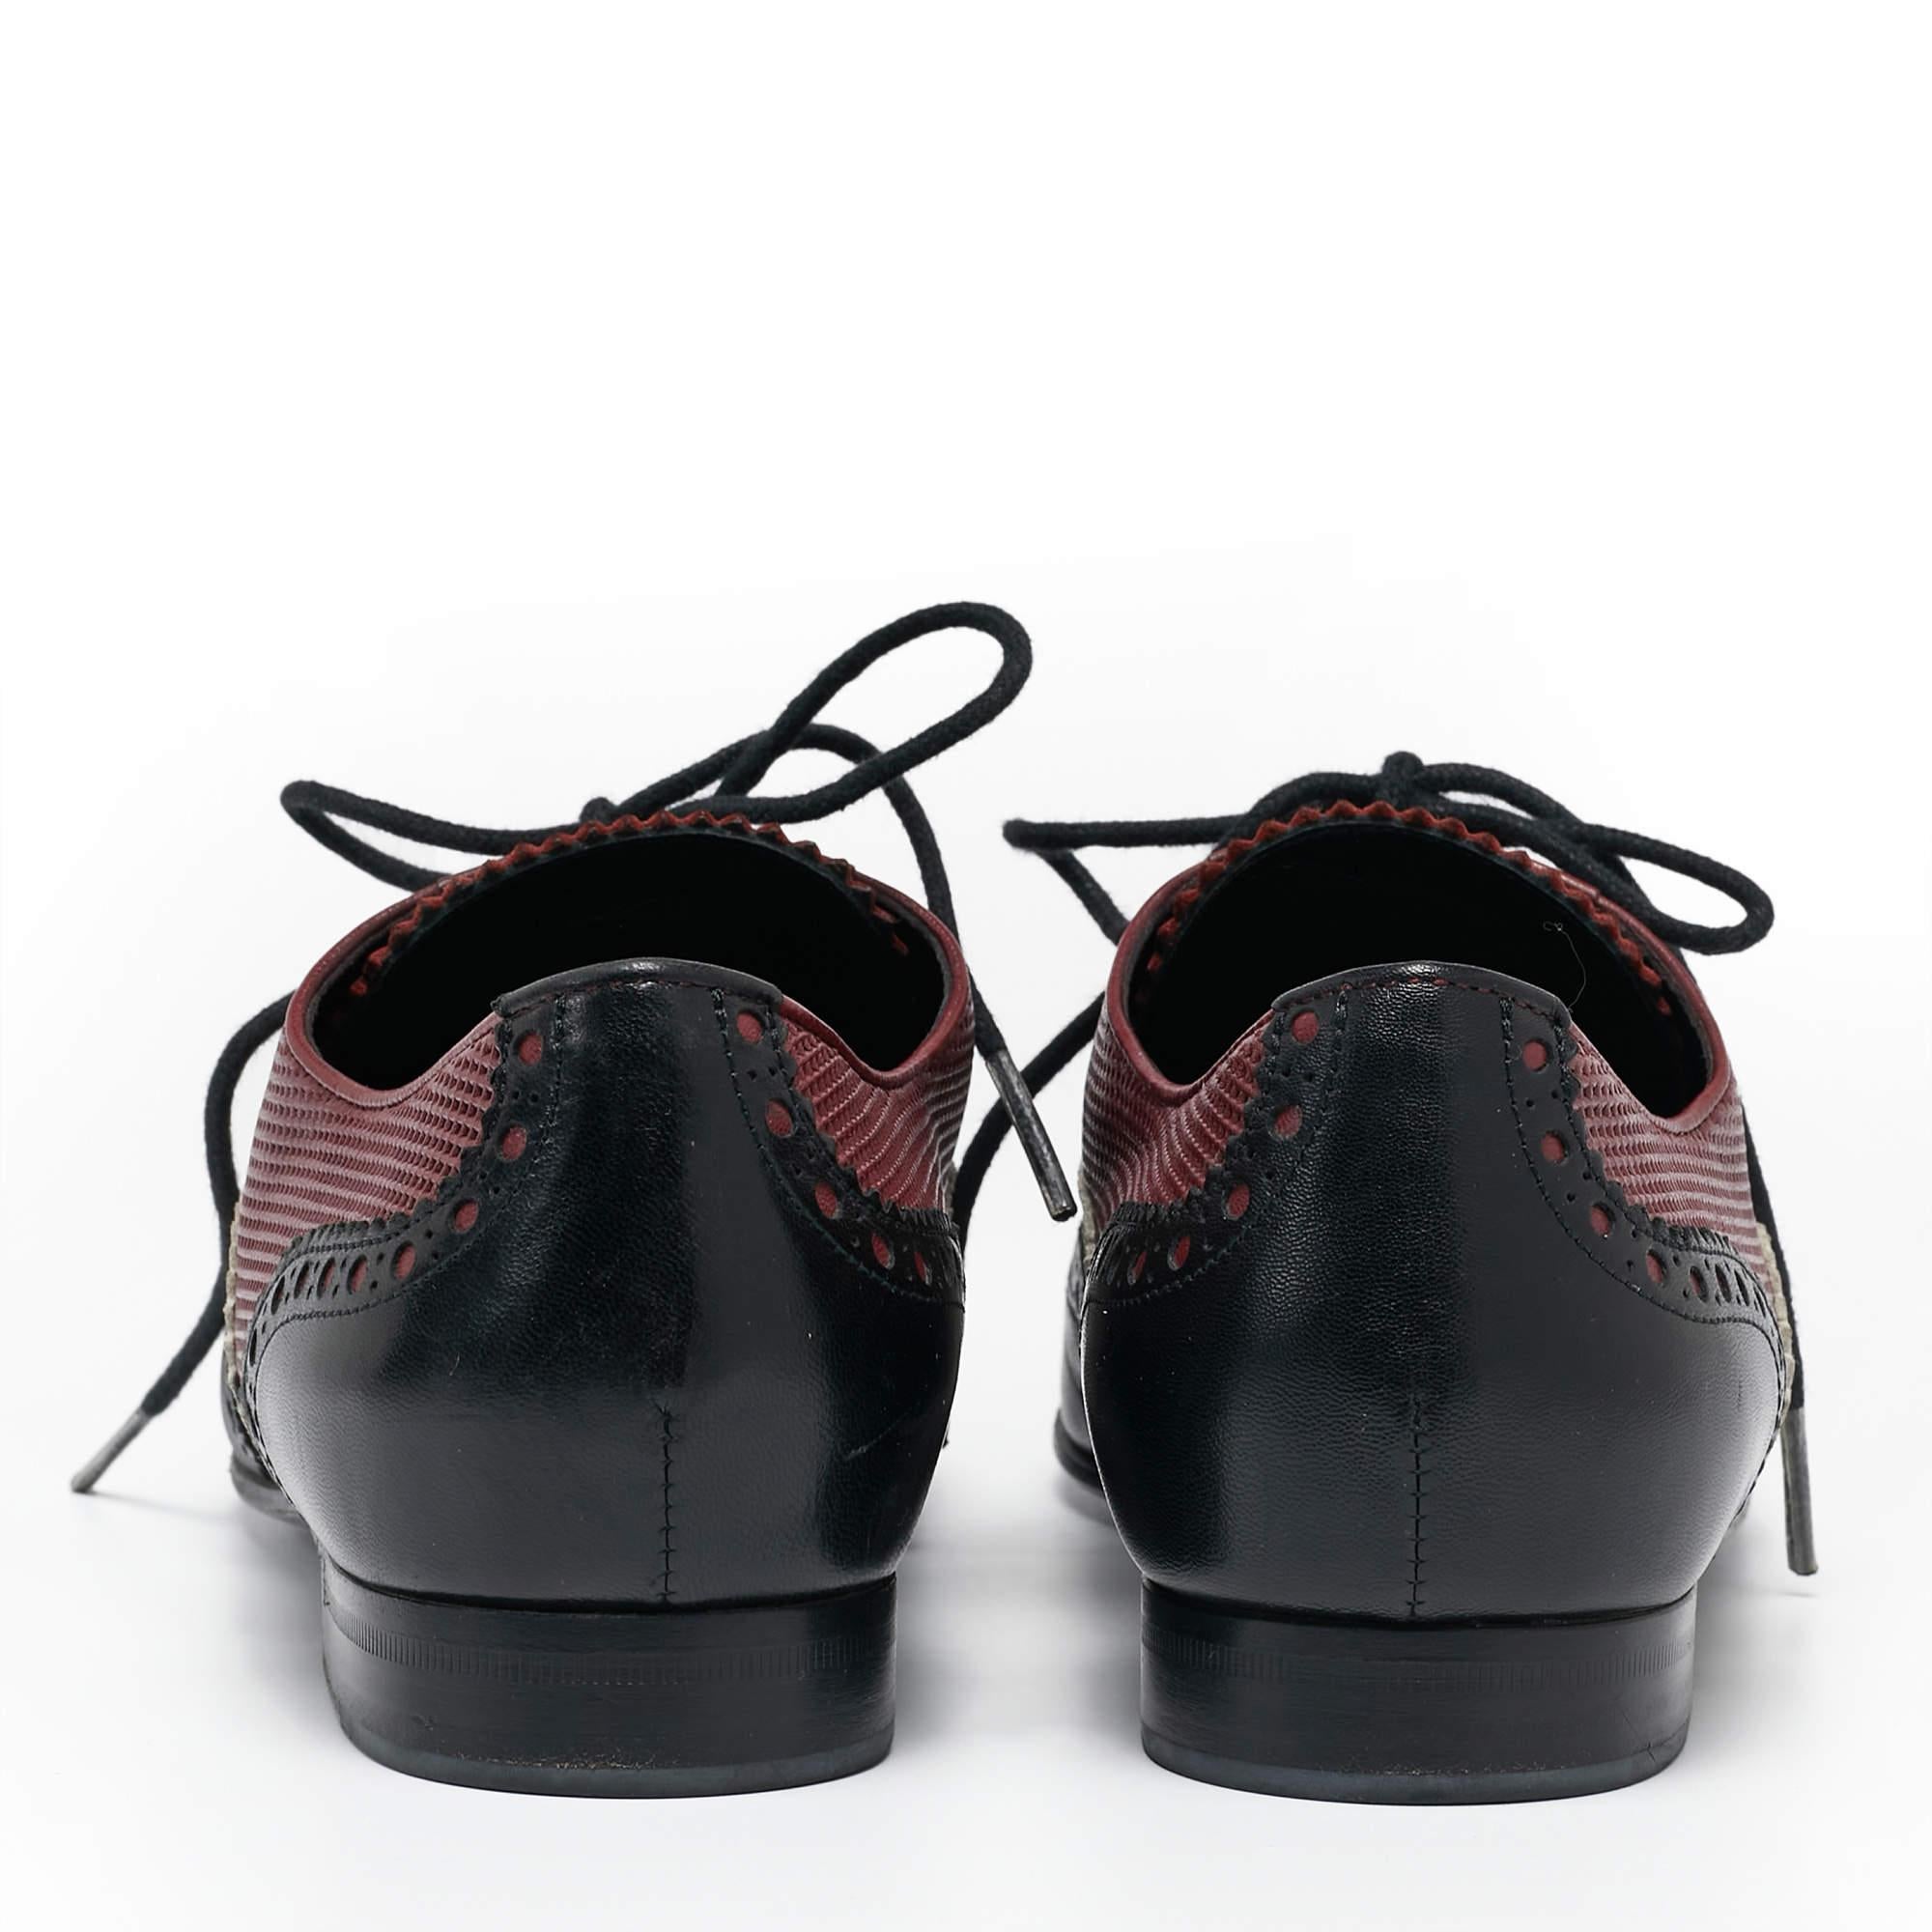 Black Gucci Multicolor Leather Pointed Toe Brogue Oxford Size 36 For Sale